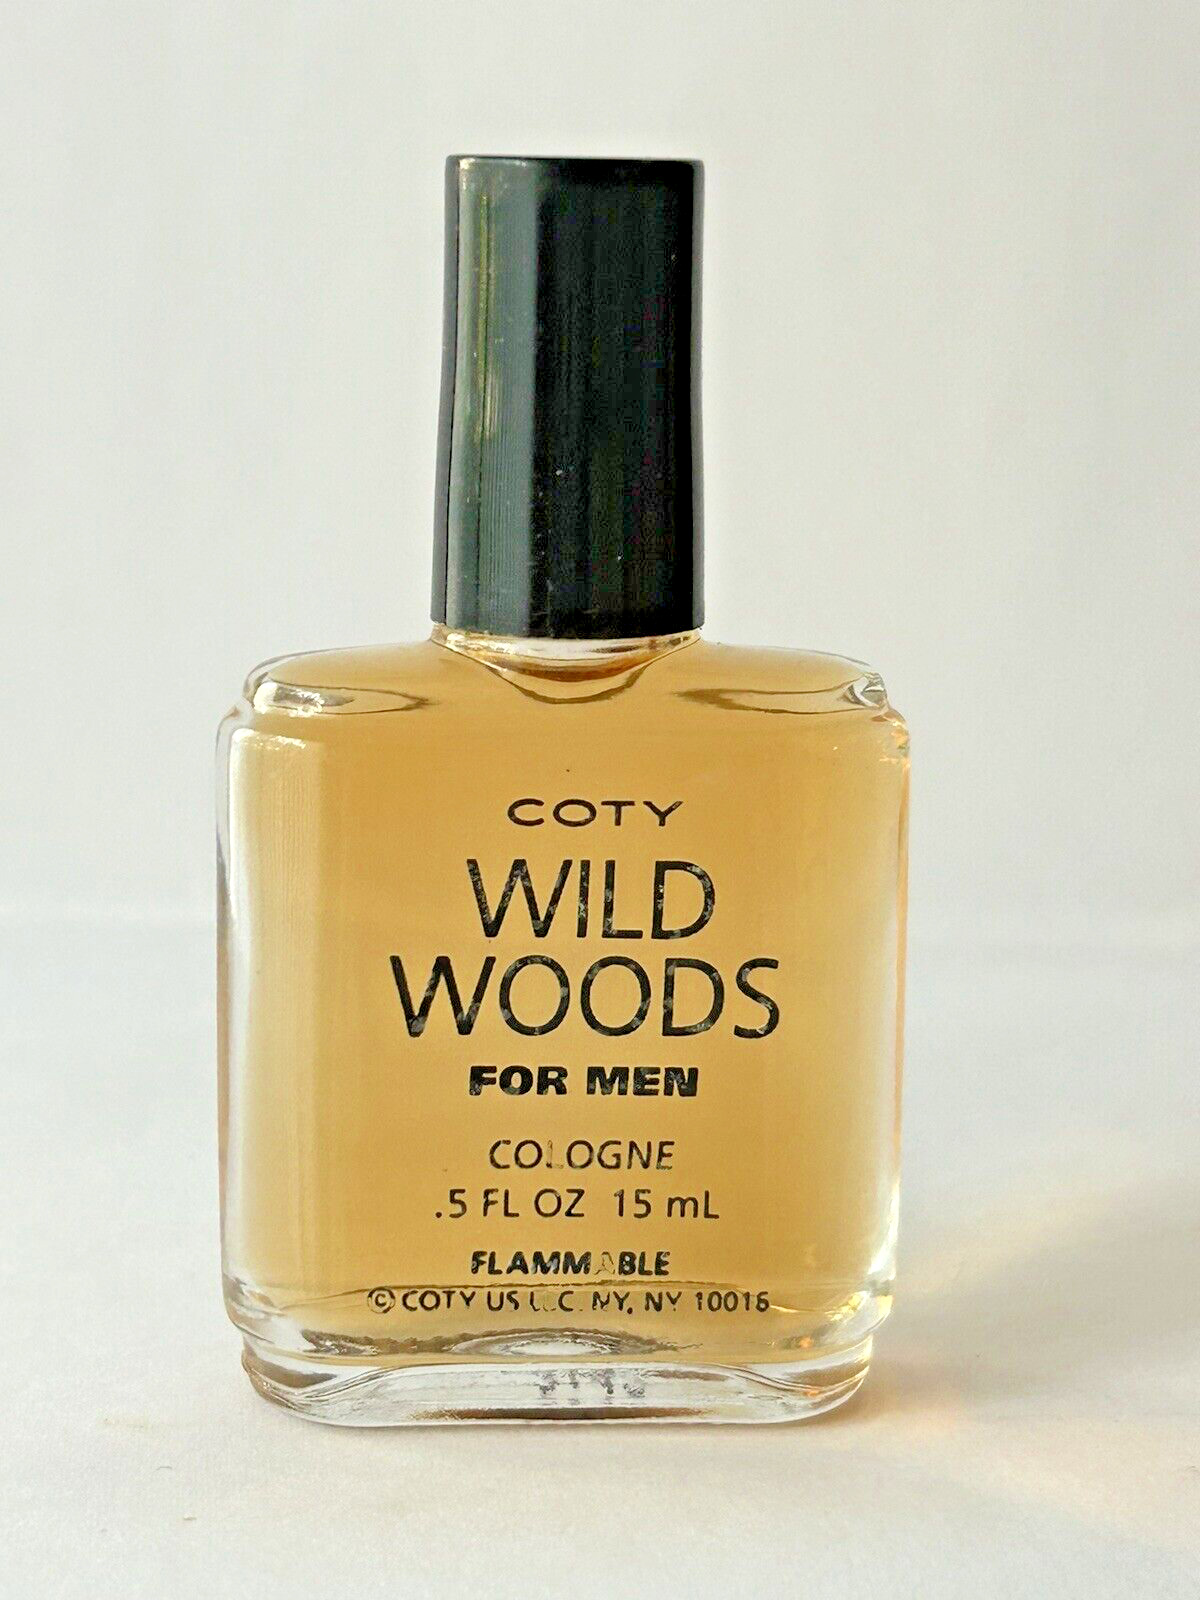 Vintage Wild Woods by Coty 0.5 oz/15mL ~Cologne Spray for Men~ Discontinued